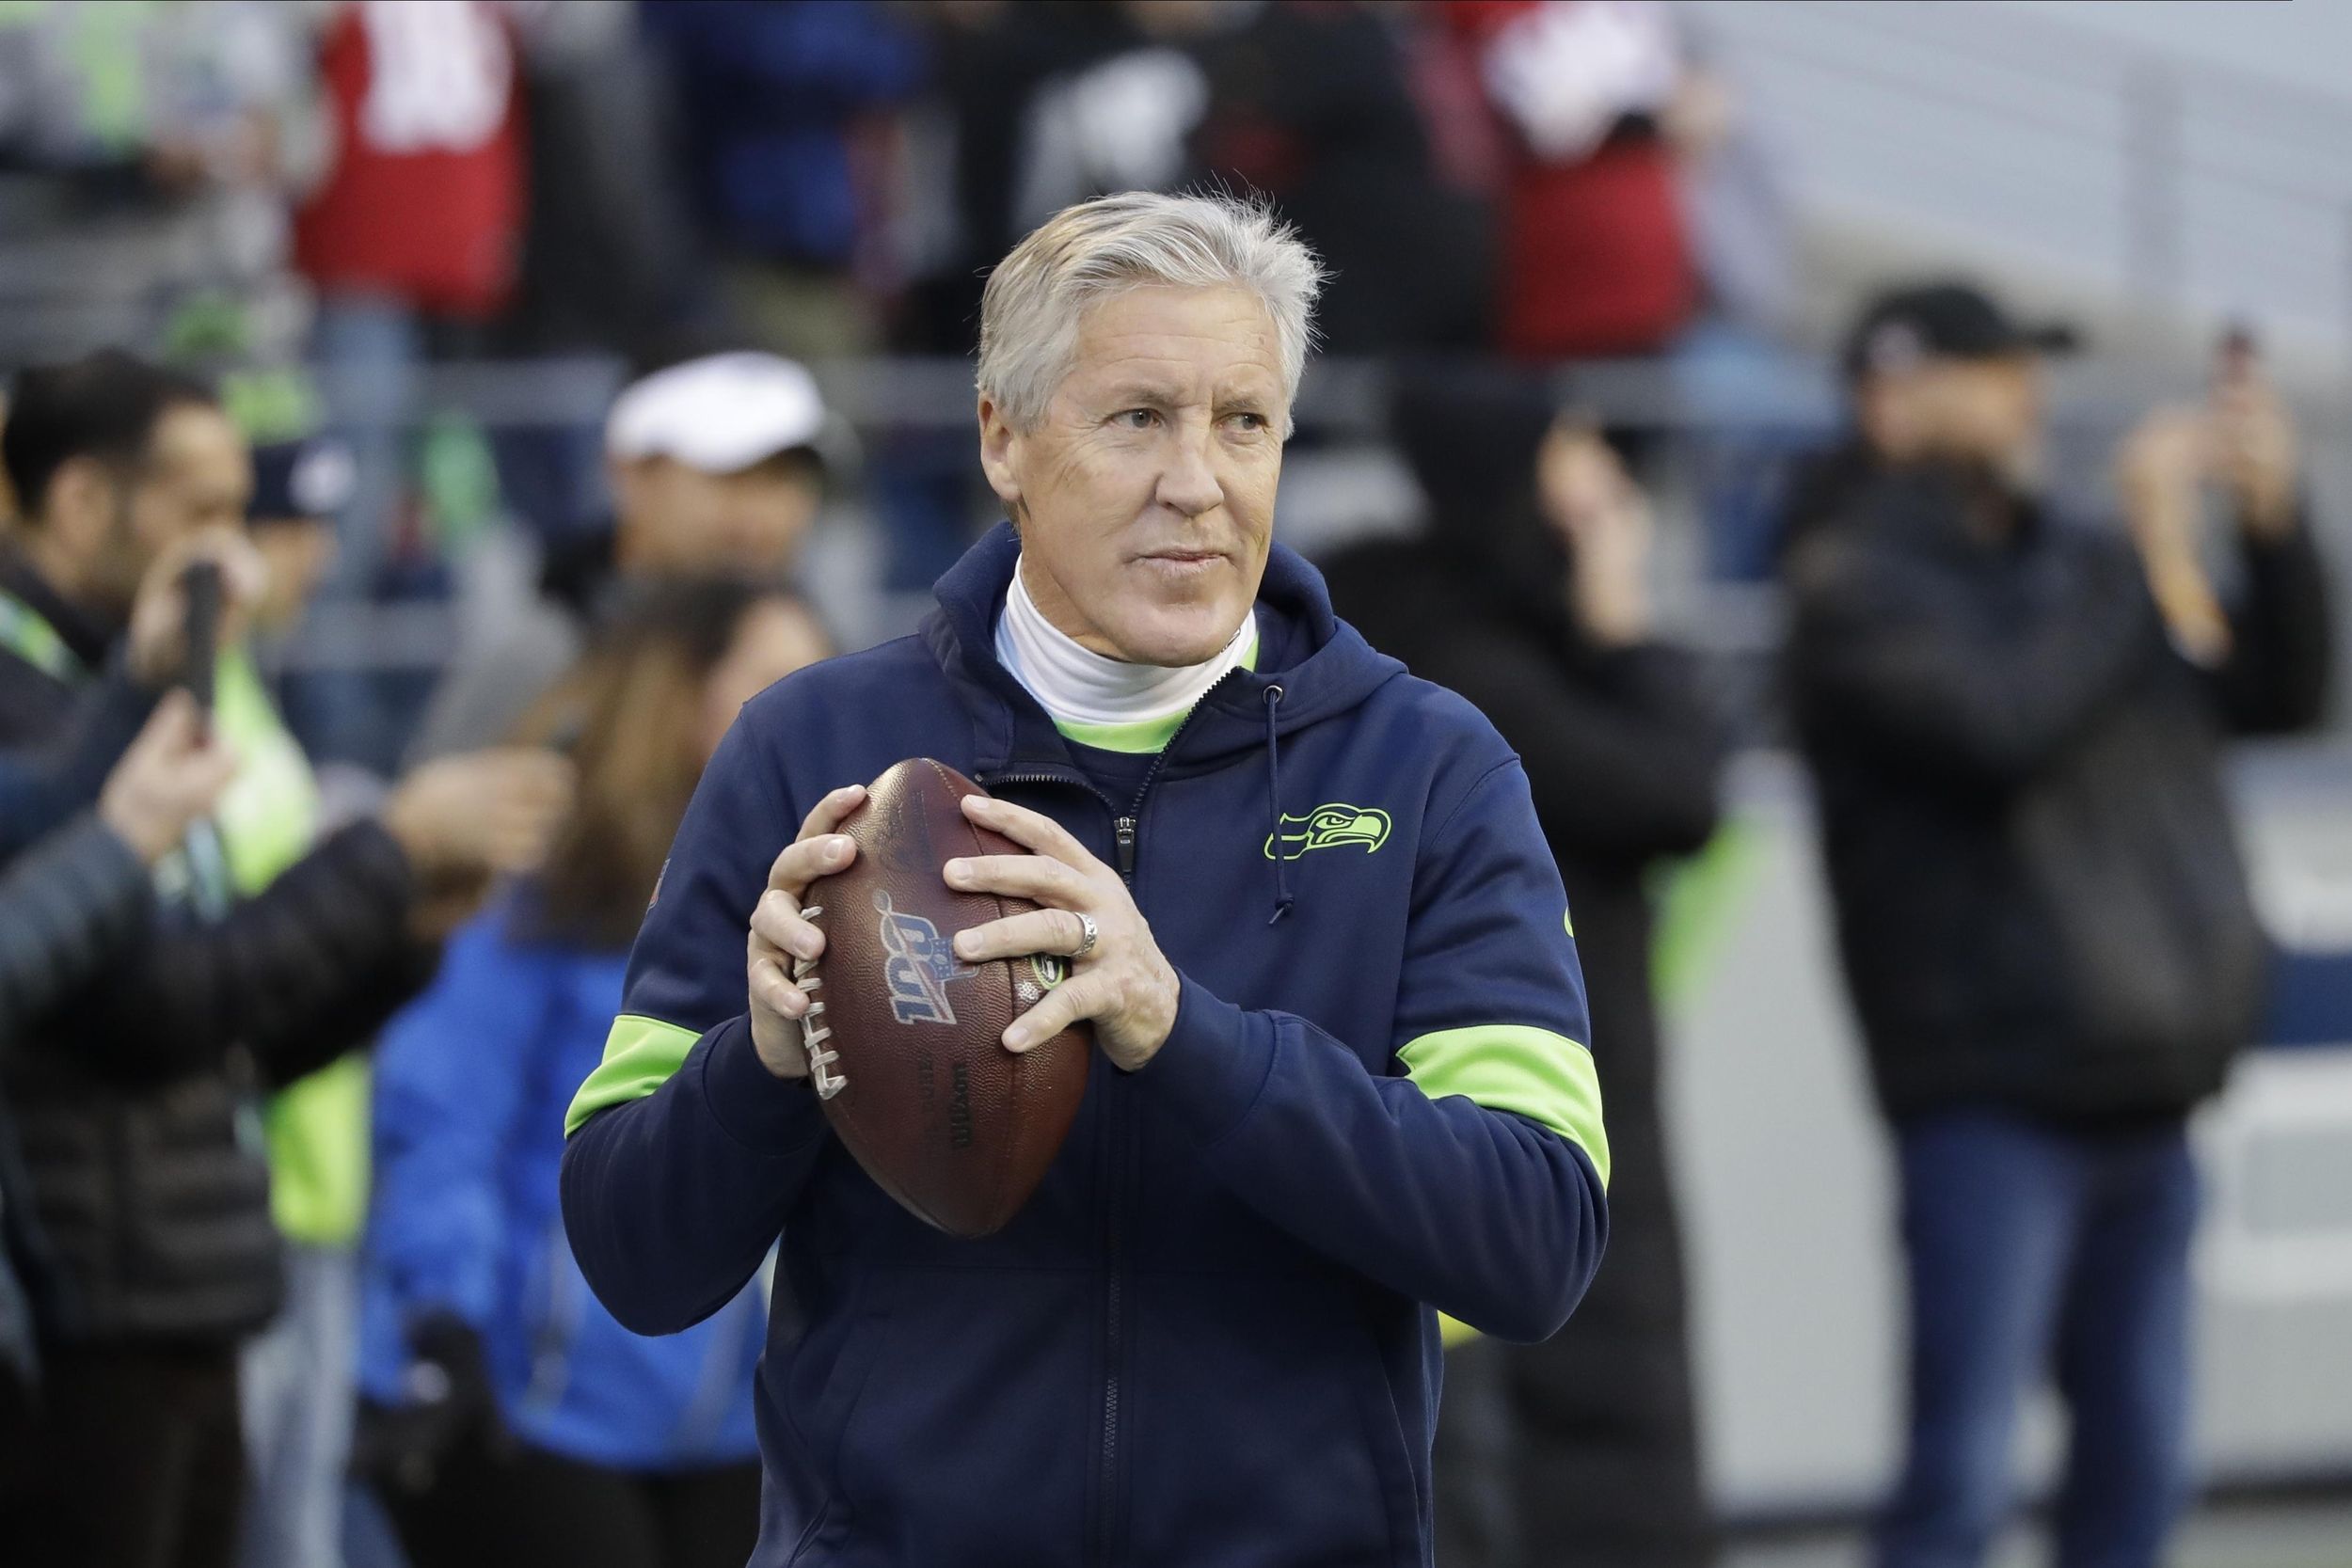 Seahawks coach Pete Carroll savors another playoff trip after decade in